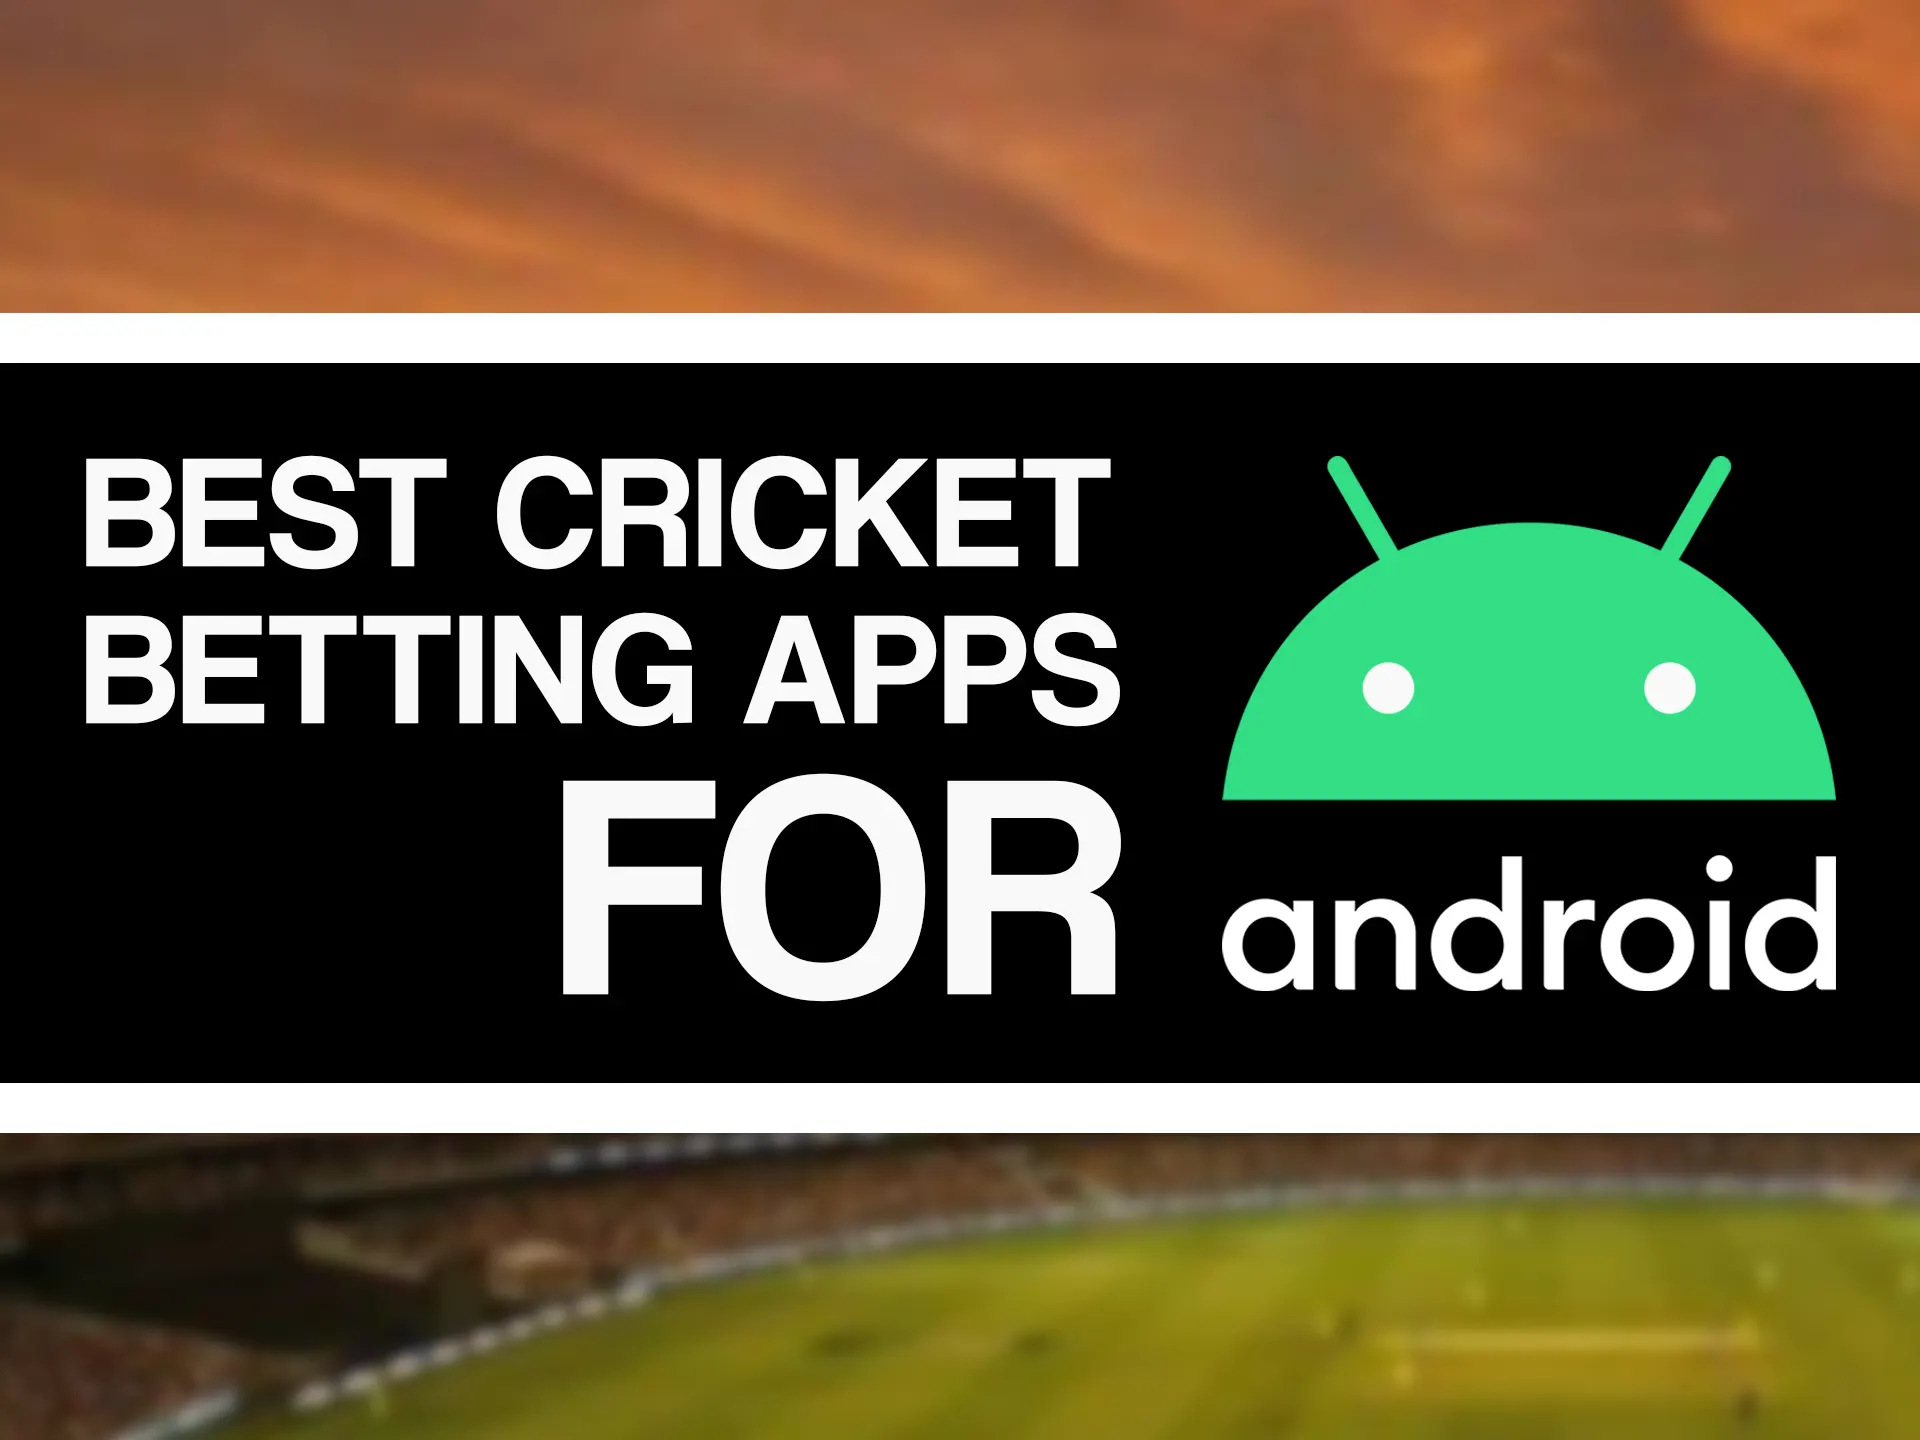 Use your favourite app for betting using Android device.